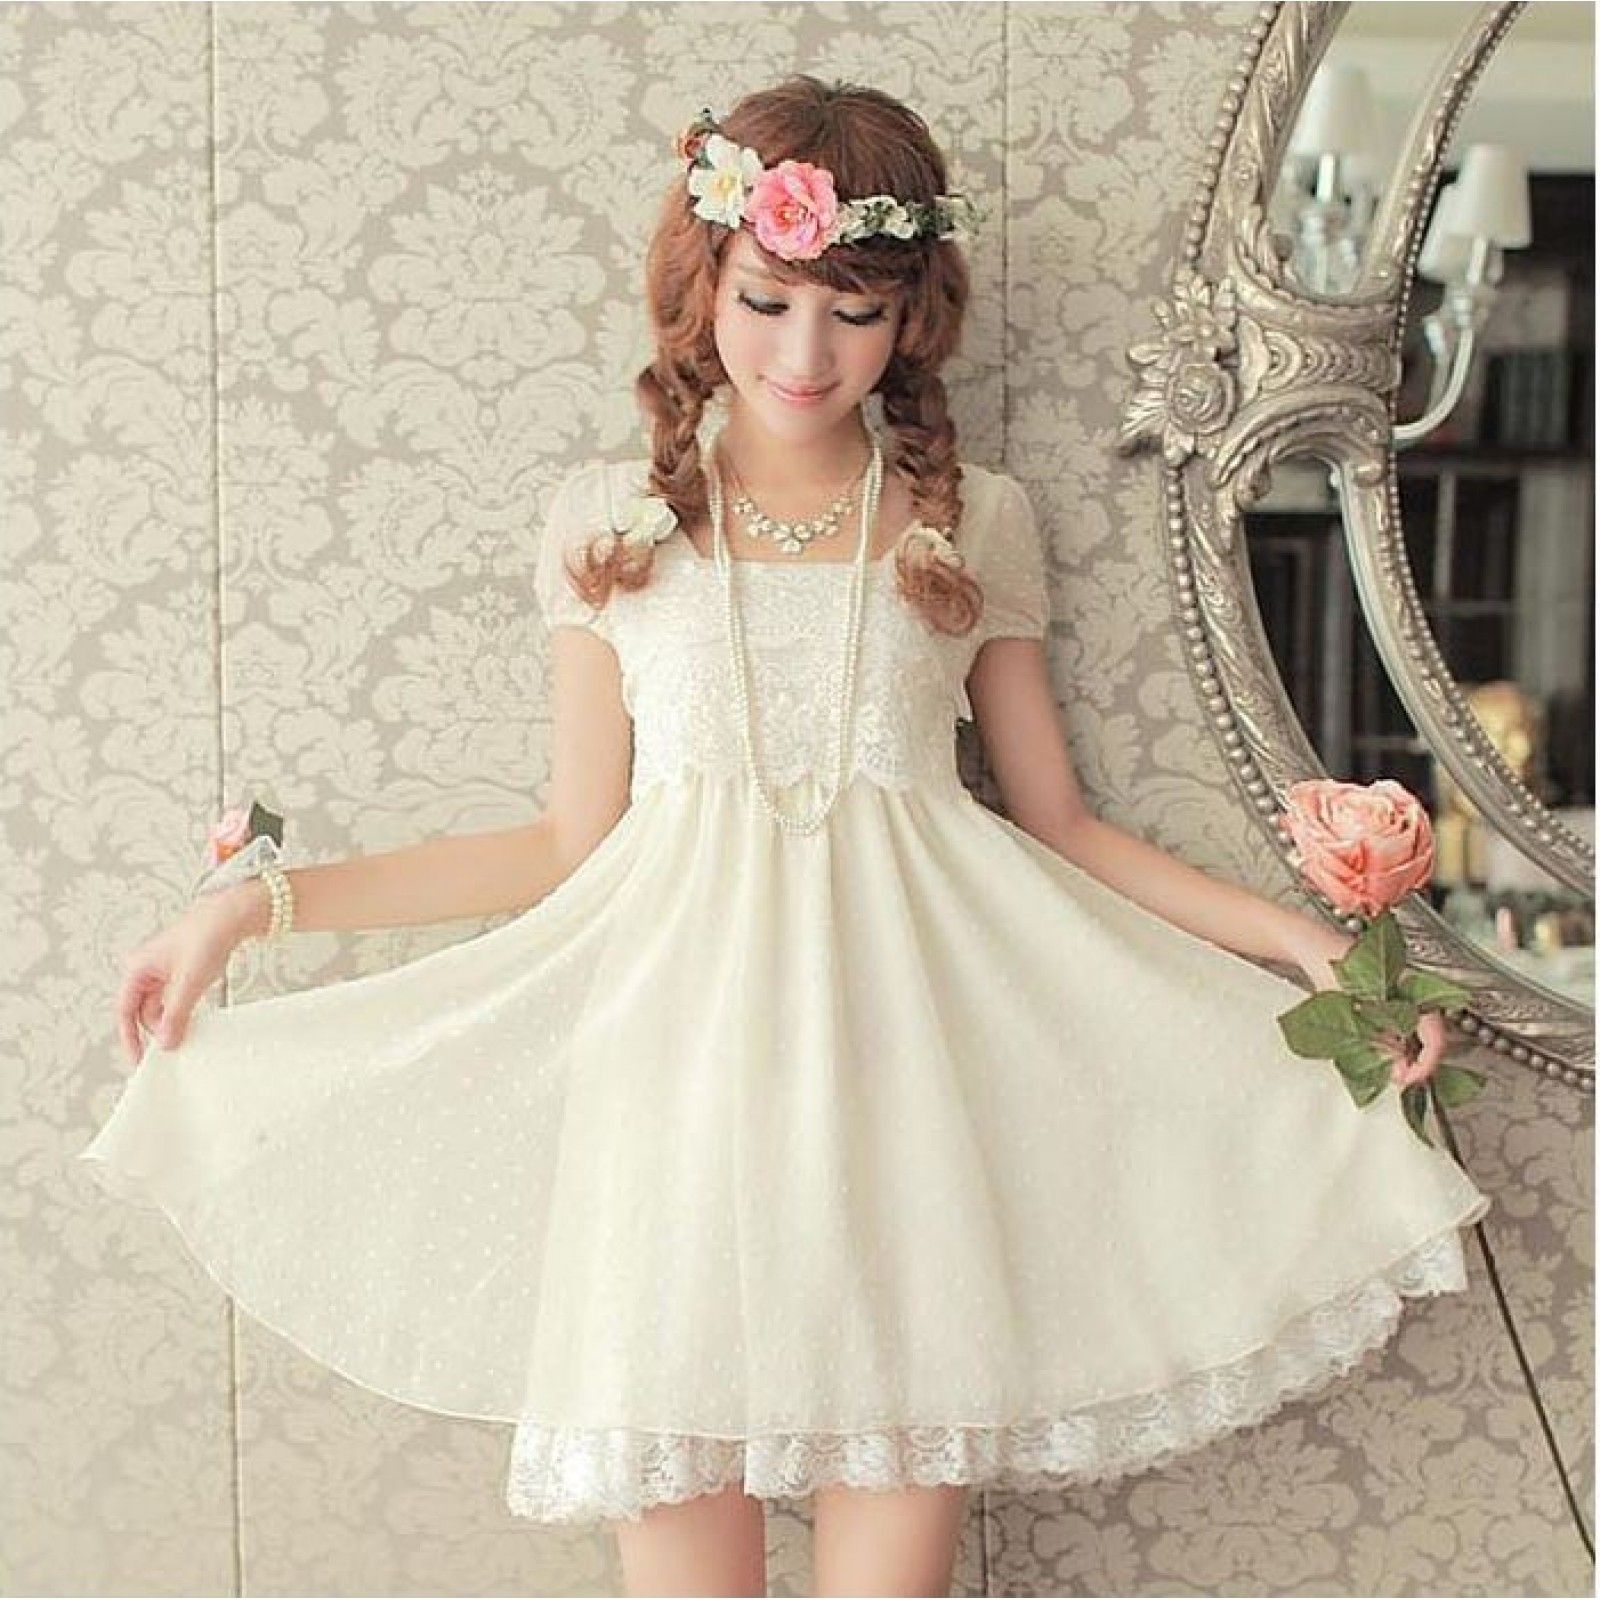 Cute White Dress With Lace Sweet Looking Japanese Fashion